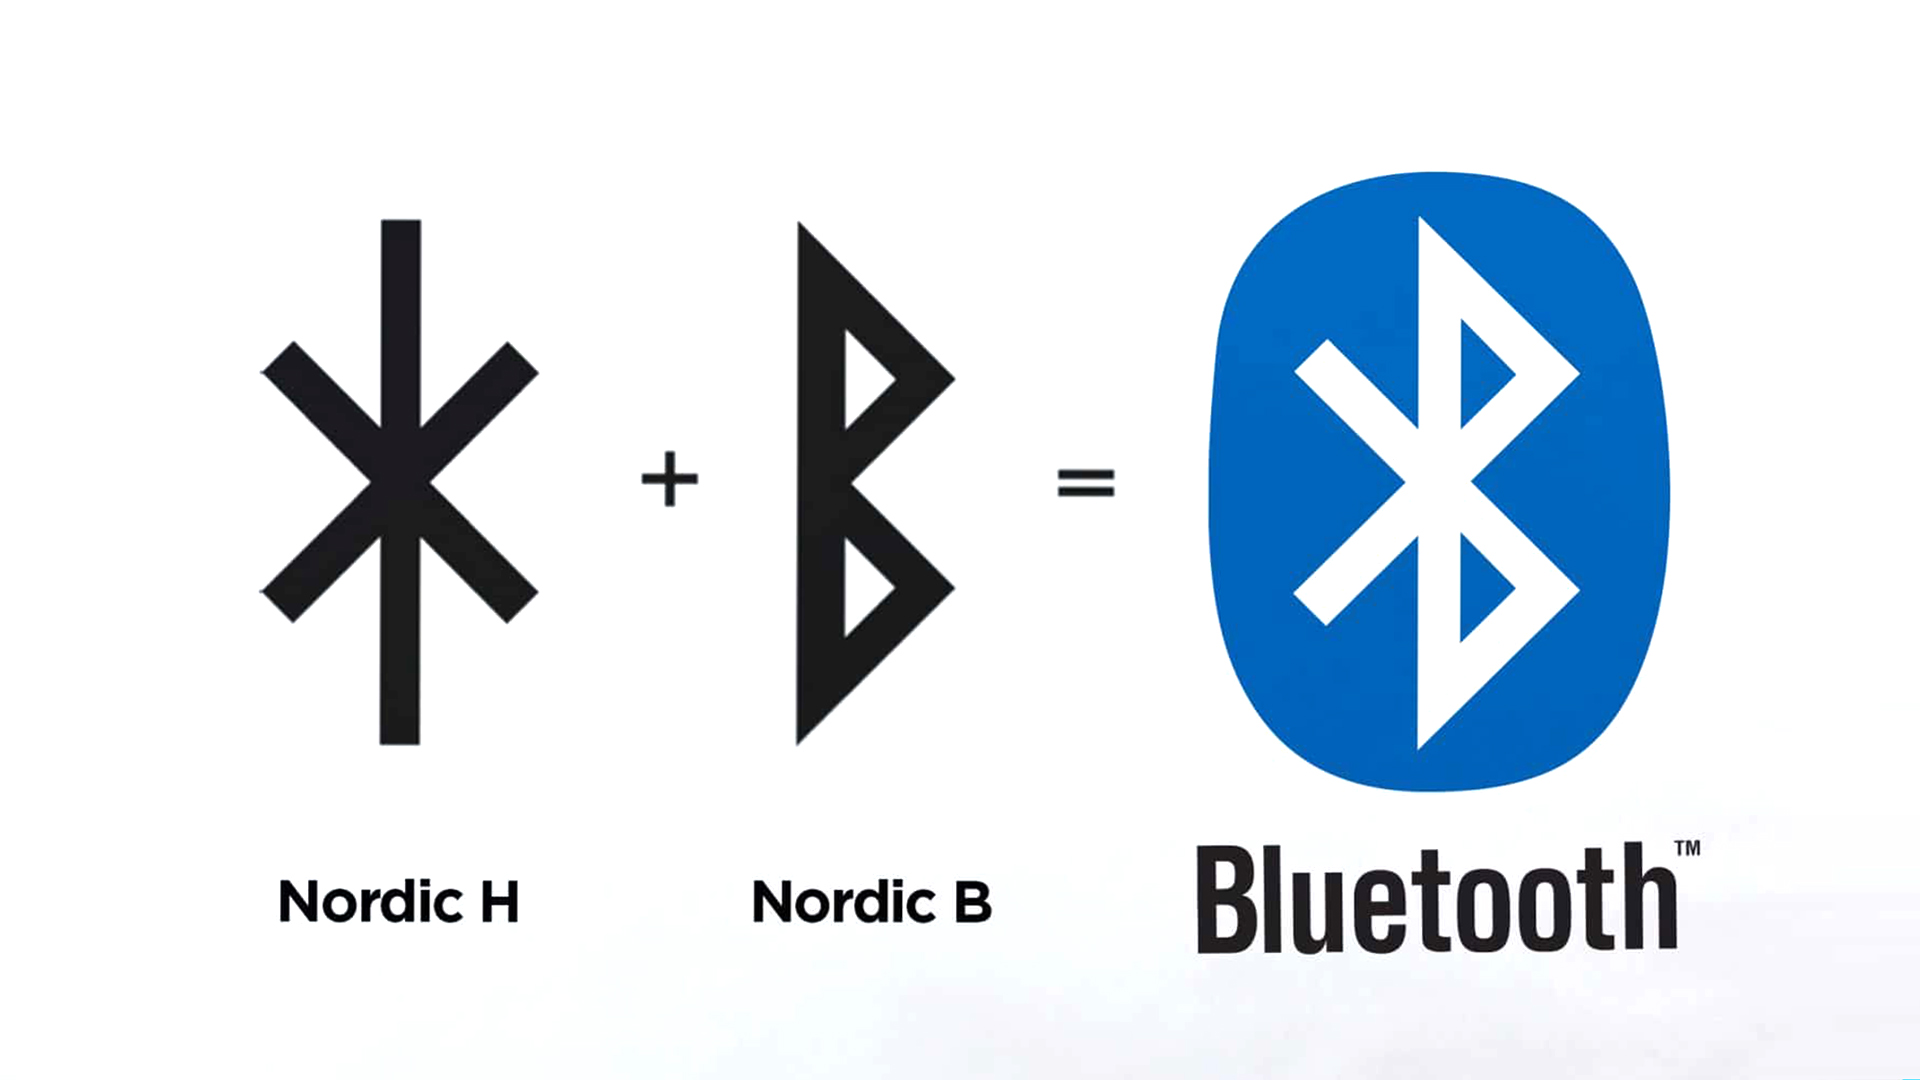 The Bluetooth logo has an awesome secret message